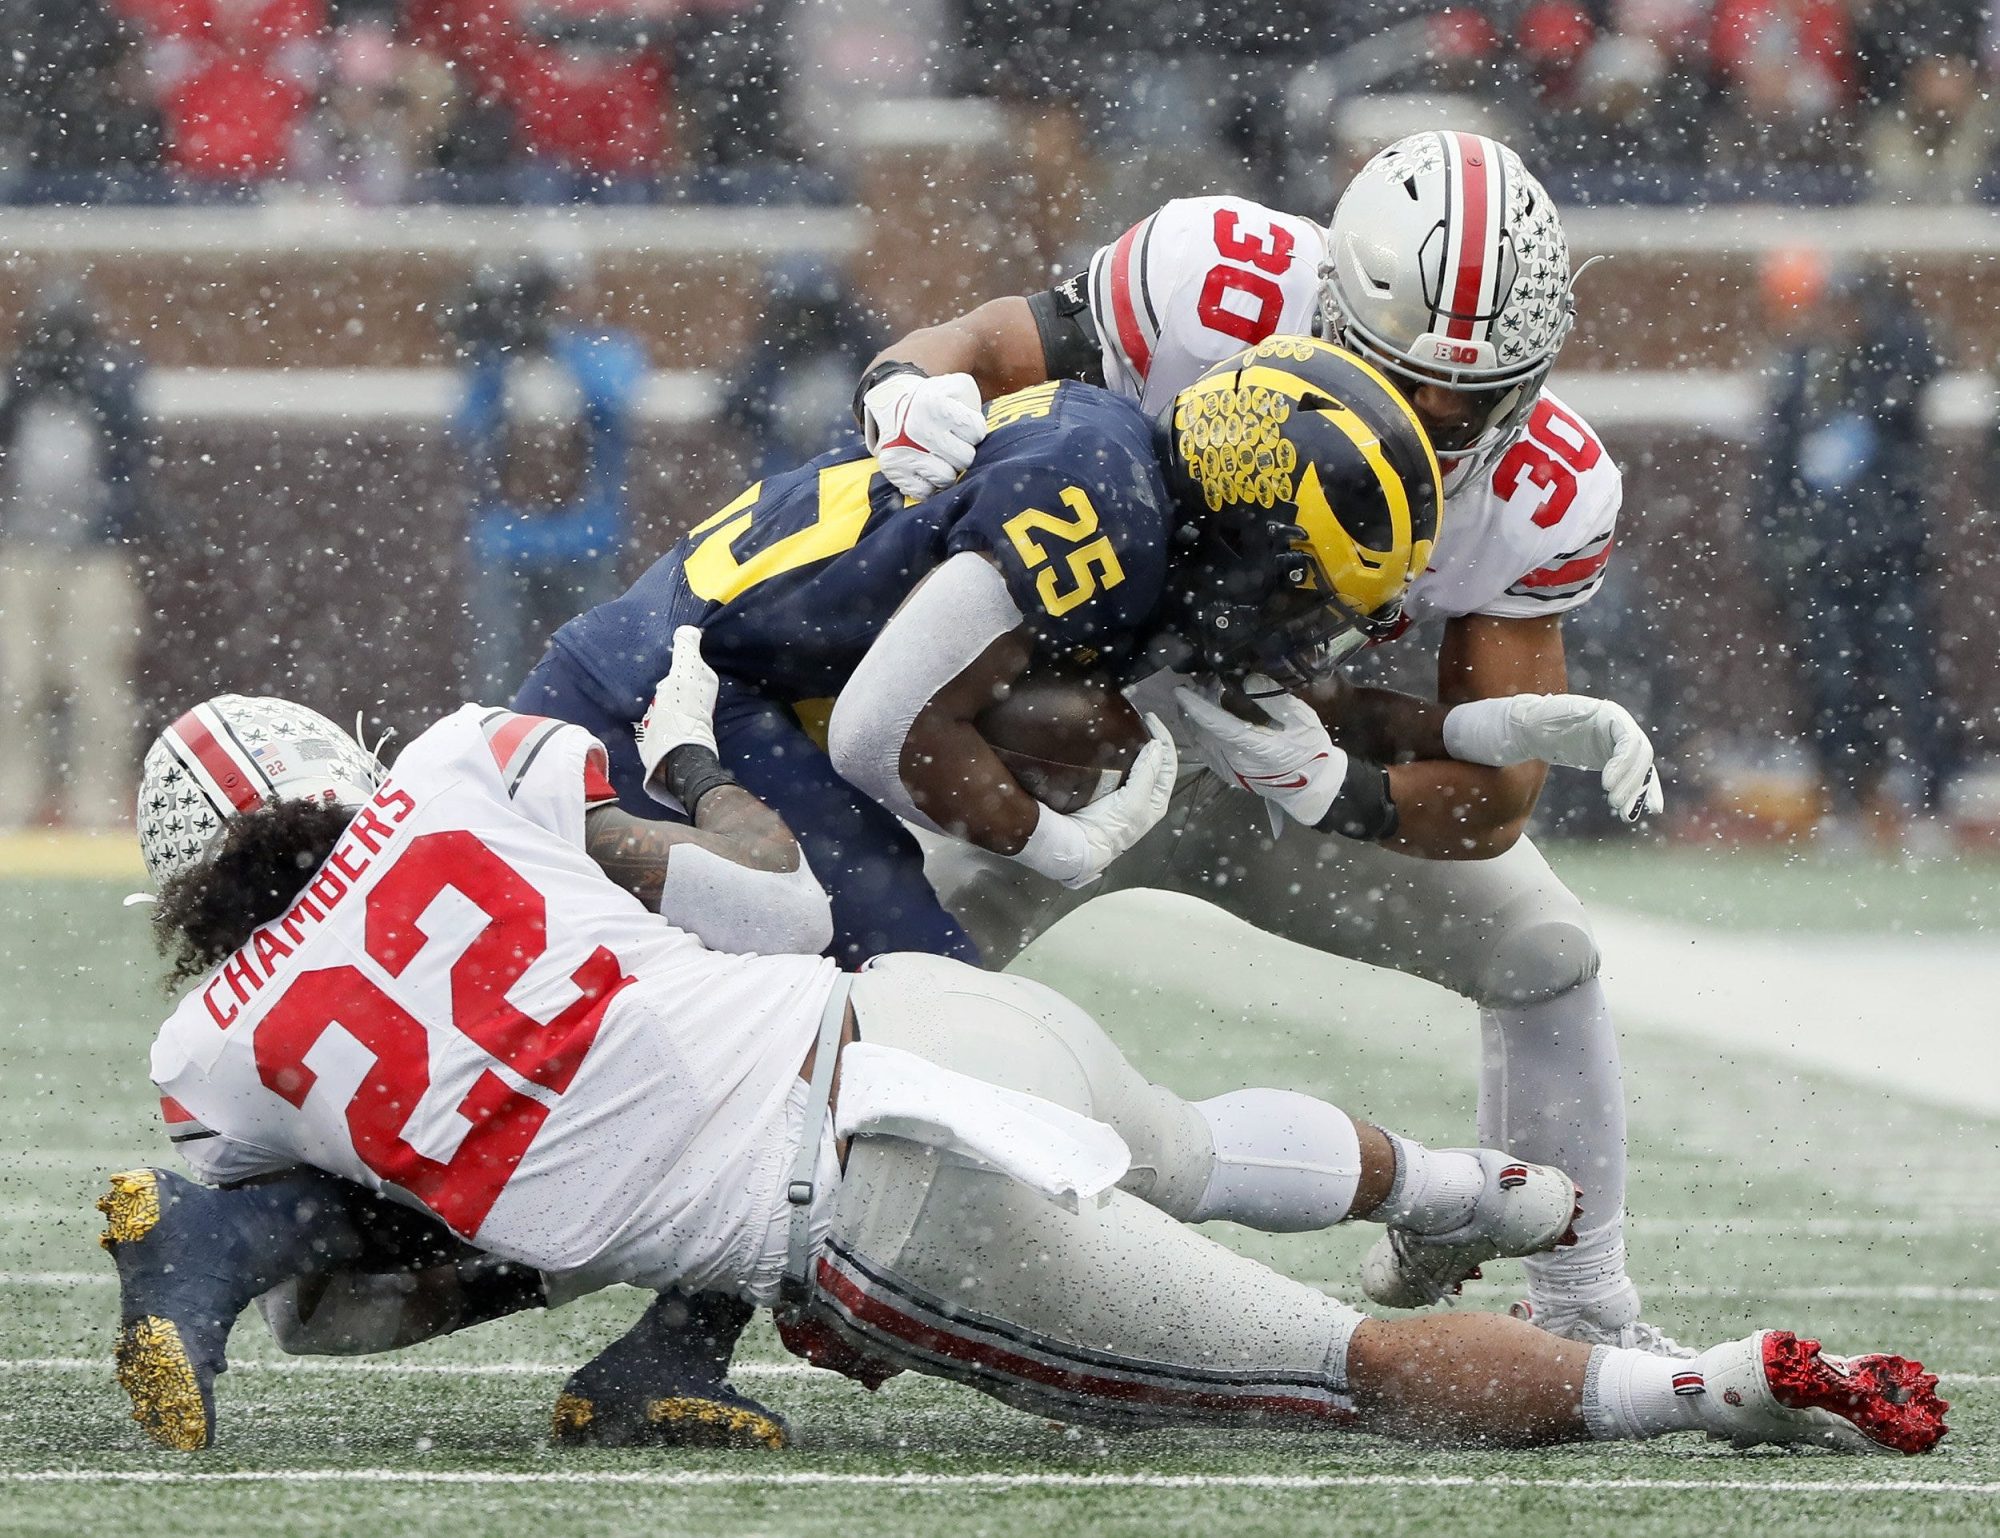 Ohio State Buckeyes linebacker Steele Chambers and Ohio State Buckeyes linebacker Cody Simon tackle Michigan Wolverines running back Hassan Haskins during the first quarter of their NCAA College football at Michigan Stadium in Ann Arbor, MI on November 27, 2021.